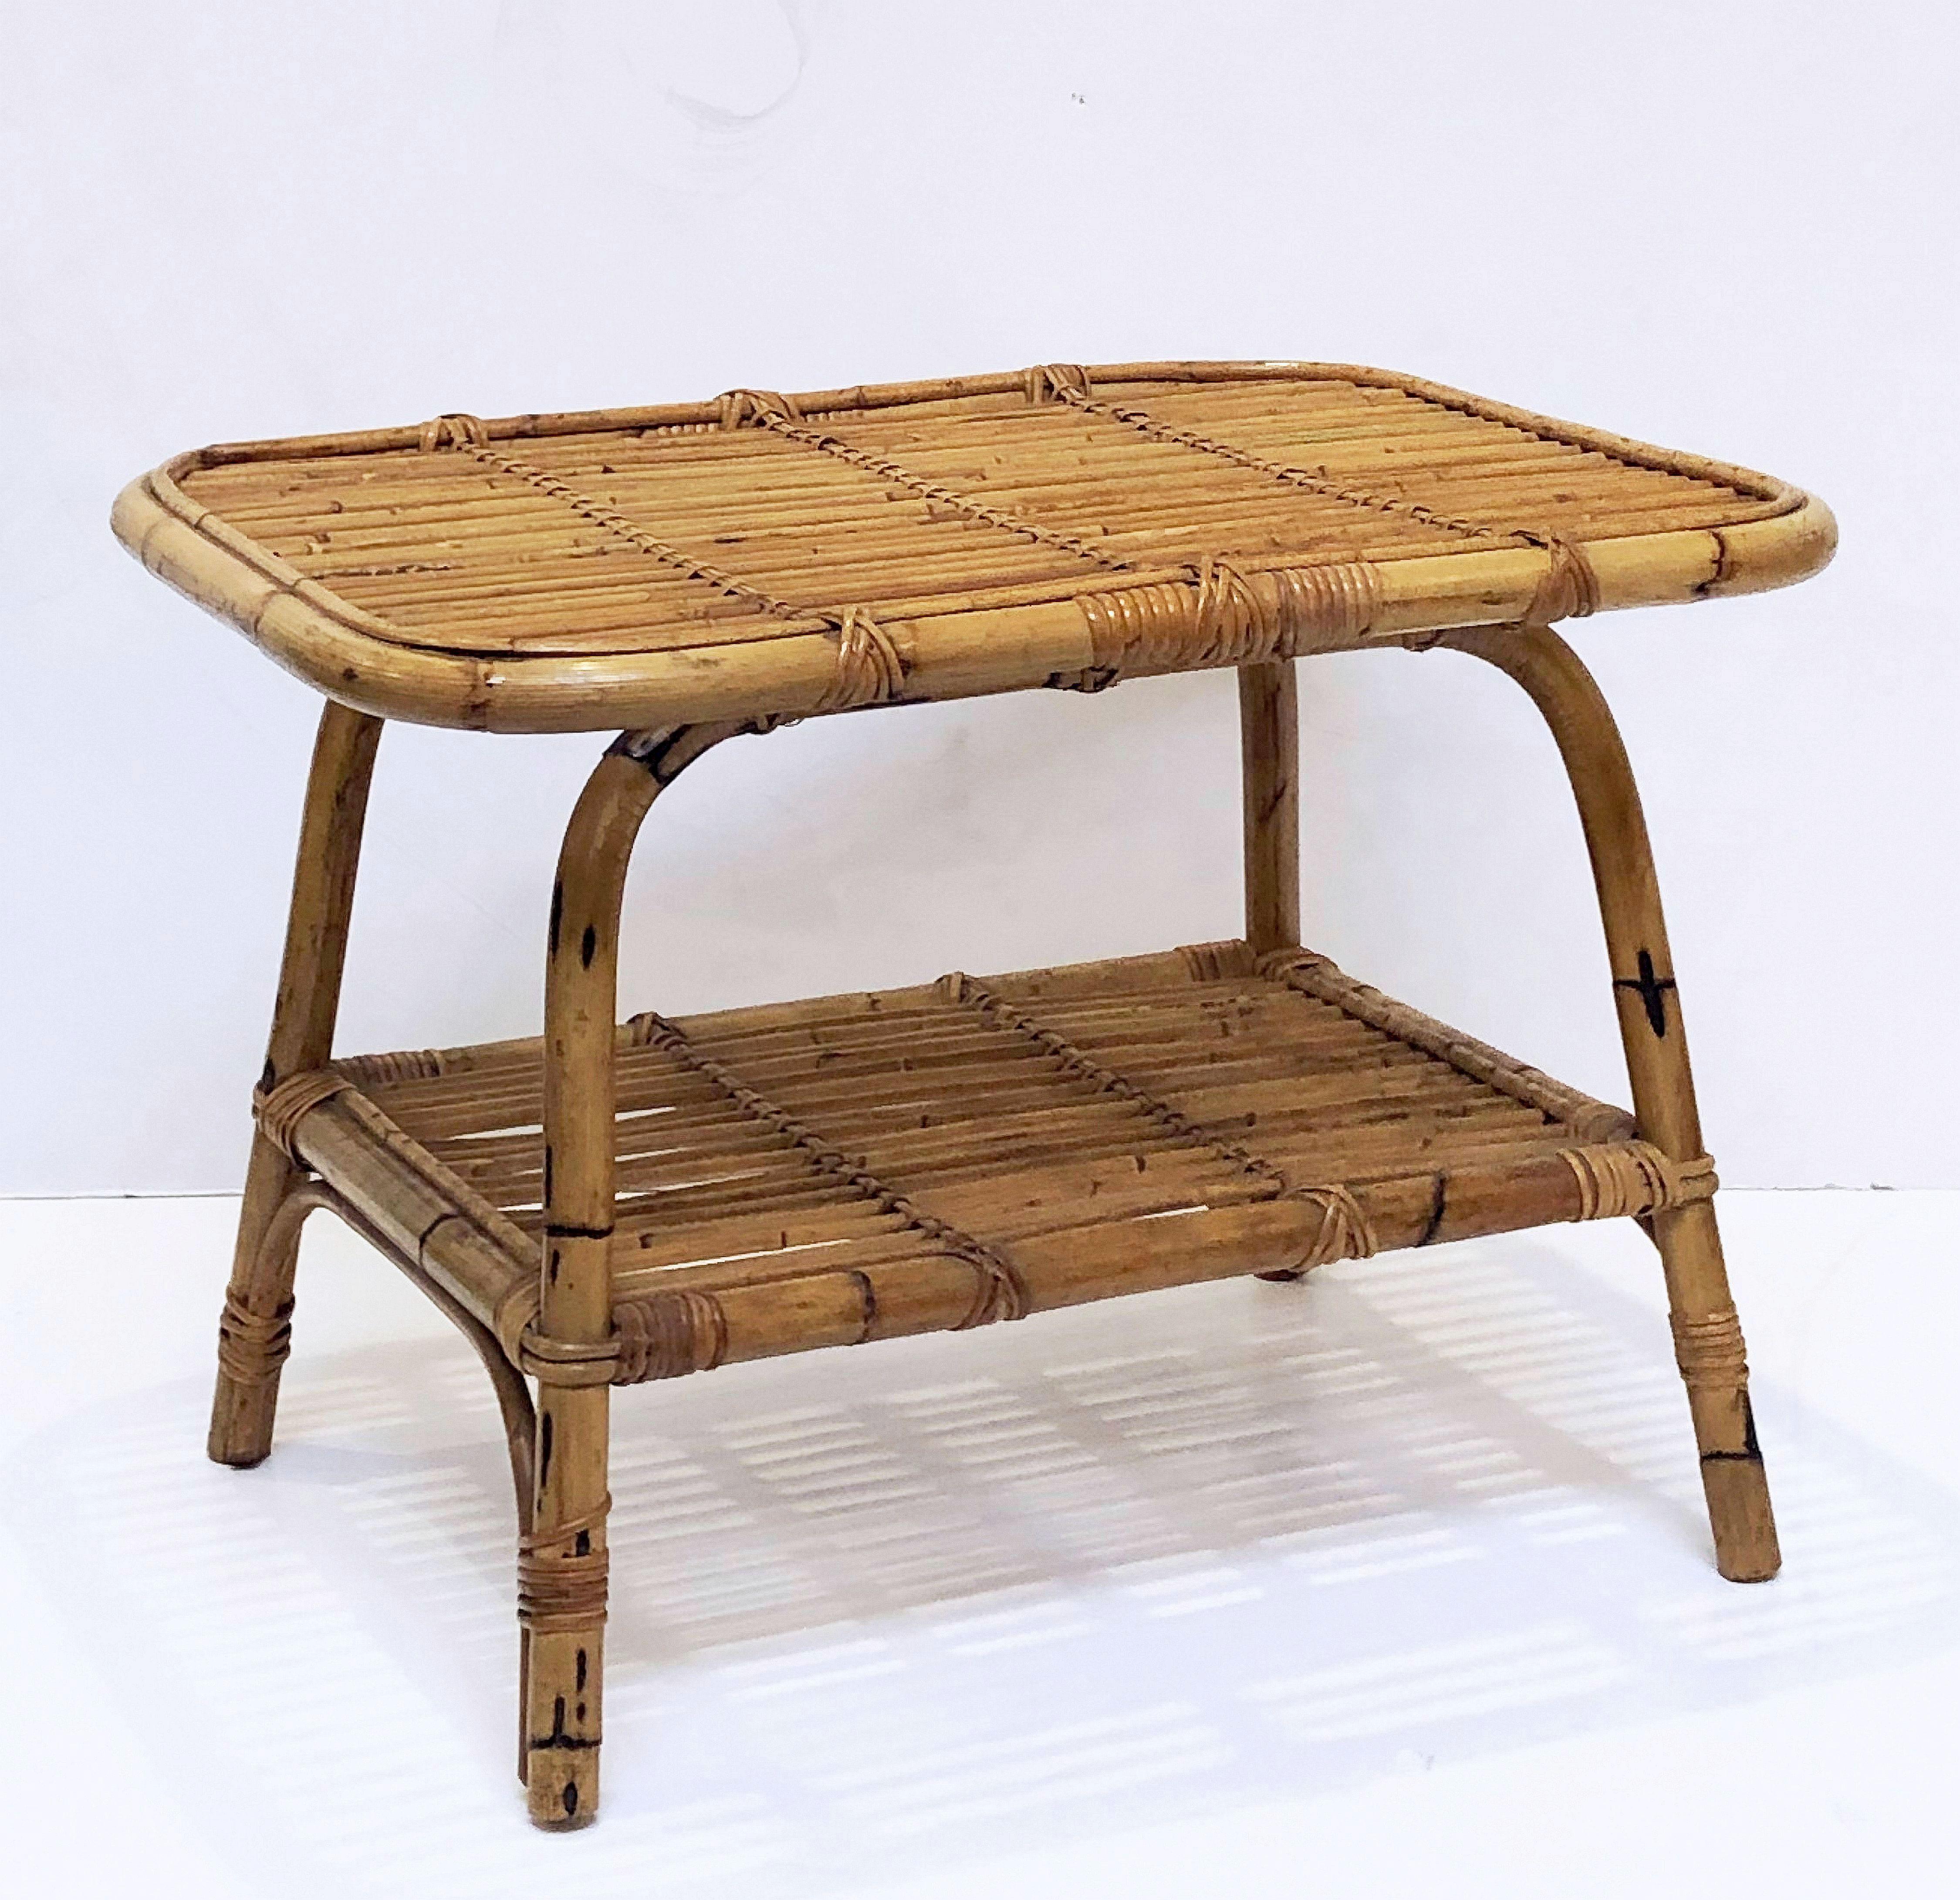 A fine Italian handcrafted midcentury rattan and bamboo side or end table.
Featuring a two-tiered body with decorative accents, the rectangular top tier with rounded corners over a bottom tier stretcher with four legs.

Great for a patio or tiki